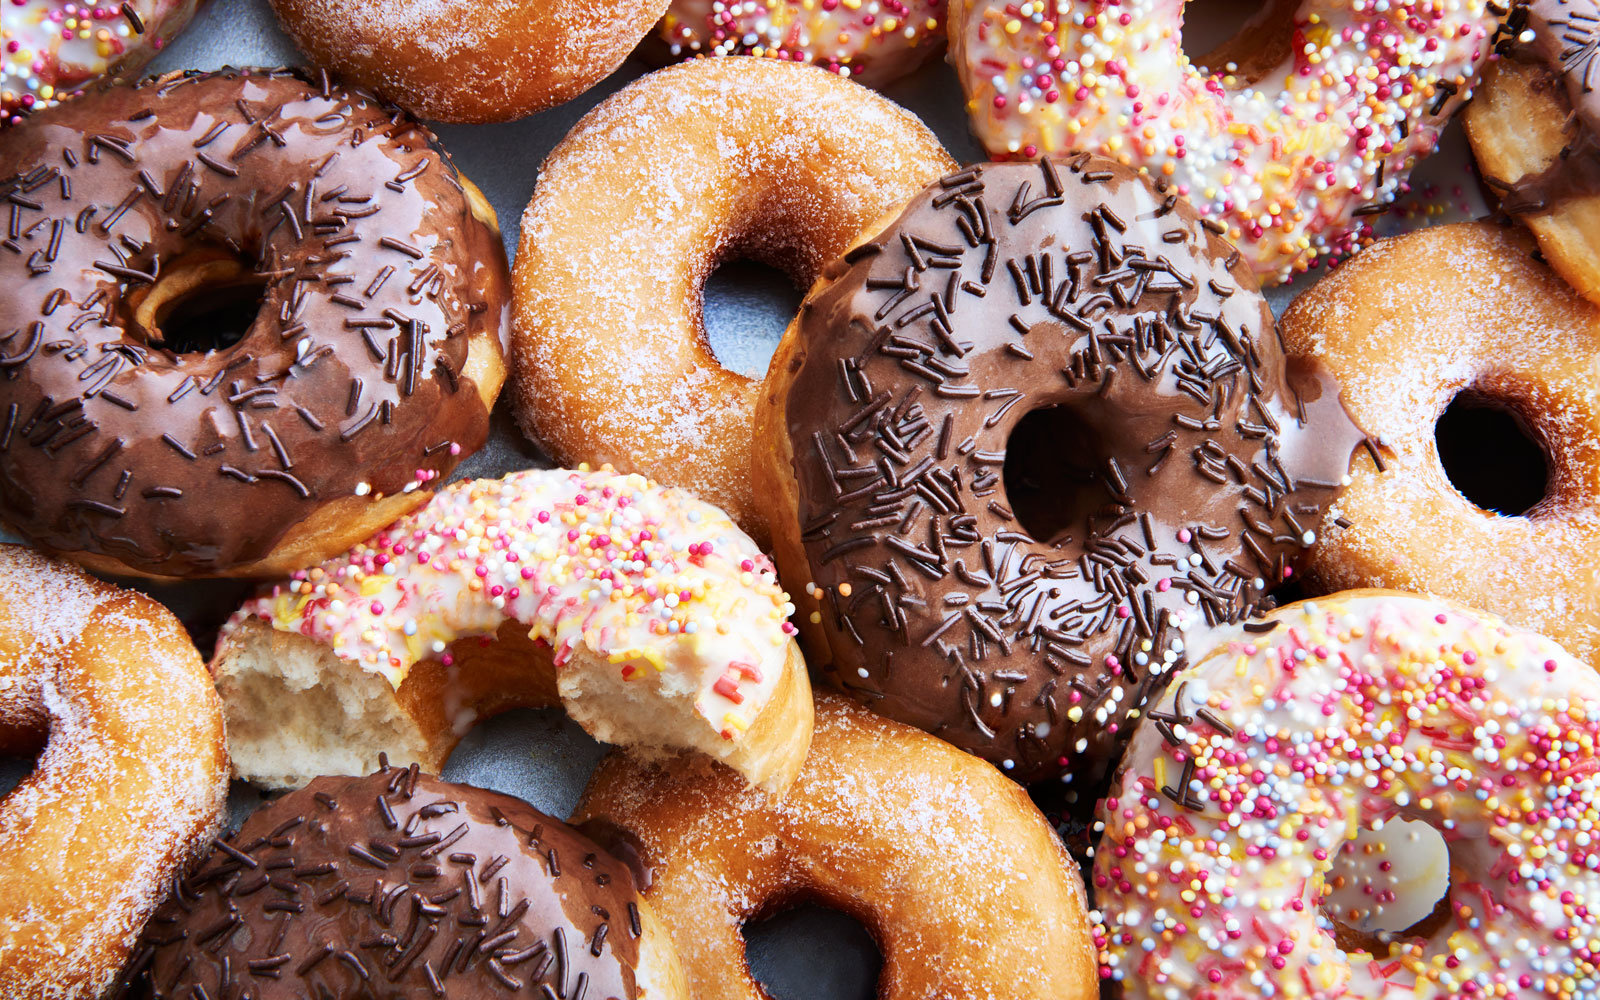 Rename These Common Foods to Find Out How Old You Are Inside Ring doughnuts covered in icing and sprinkes